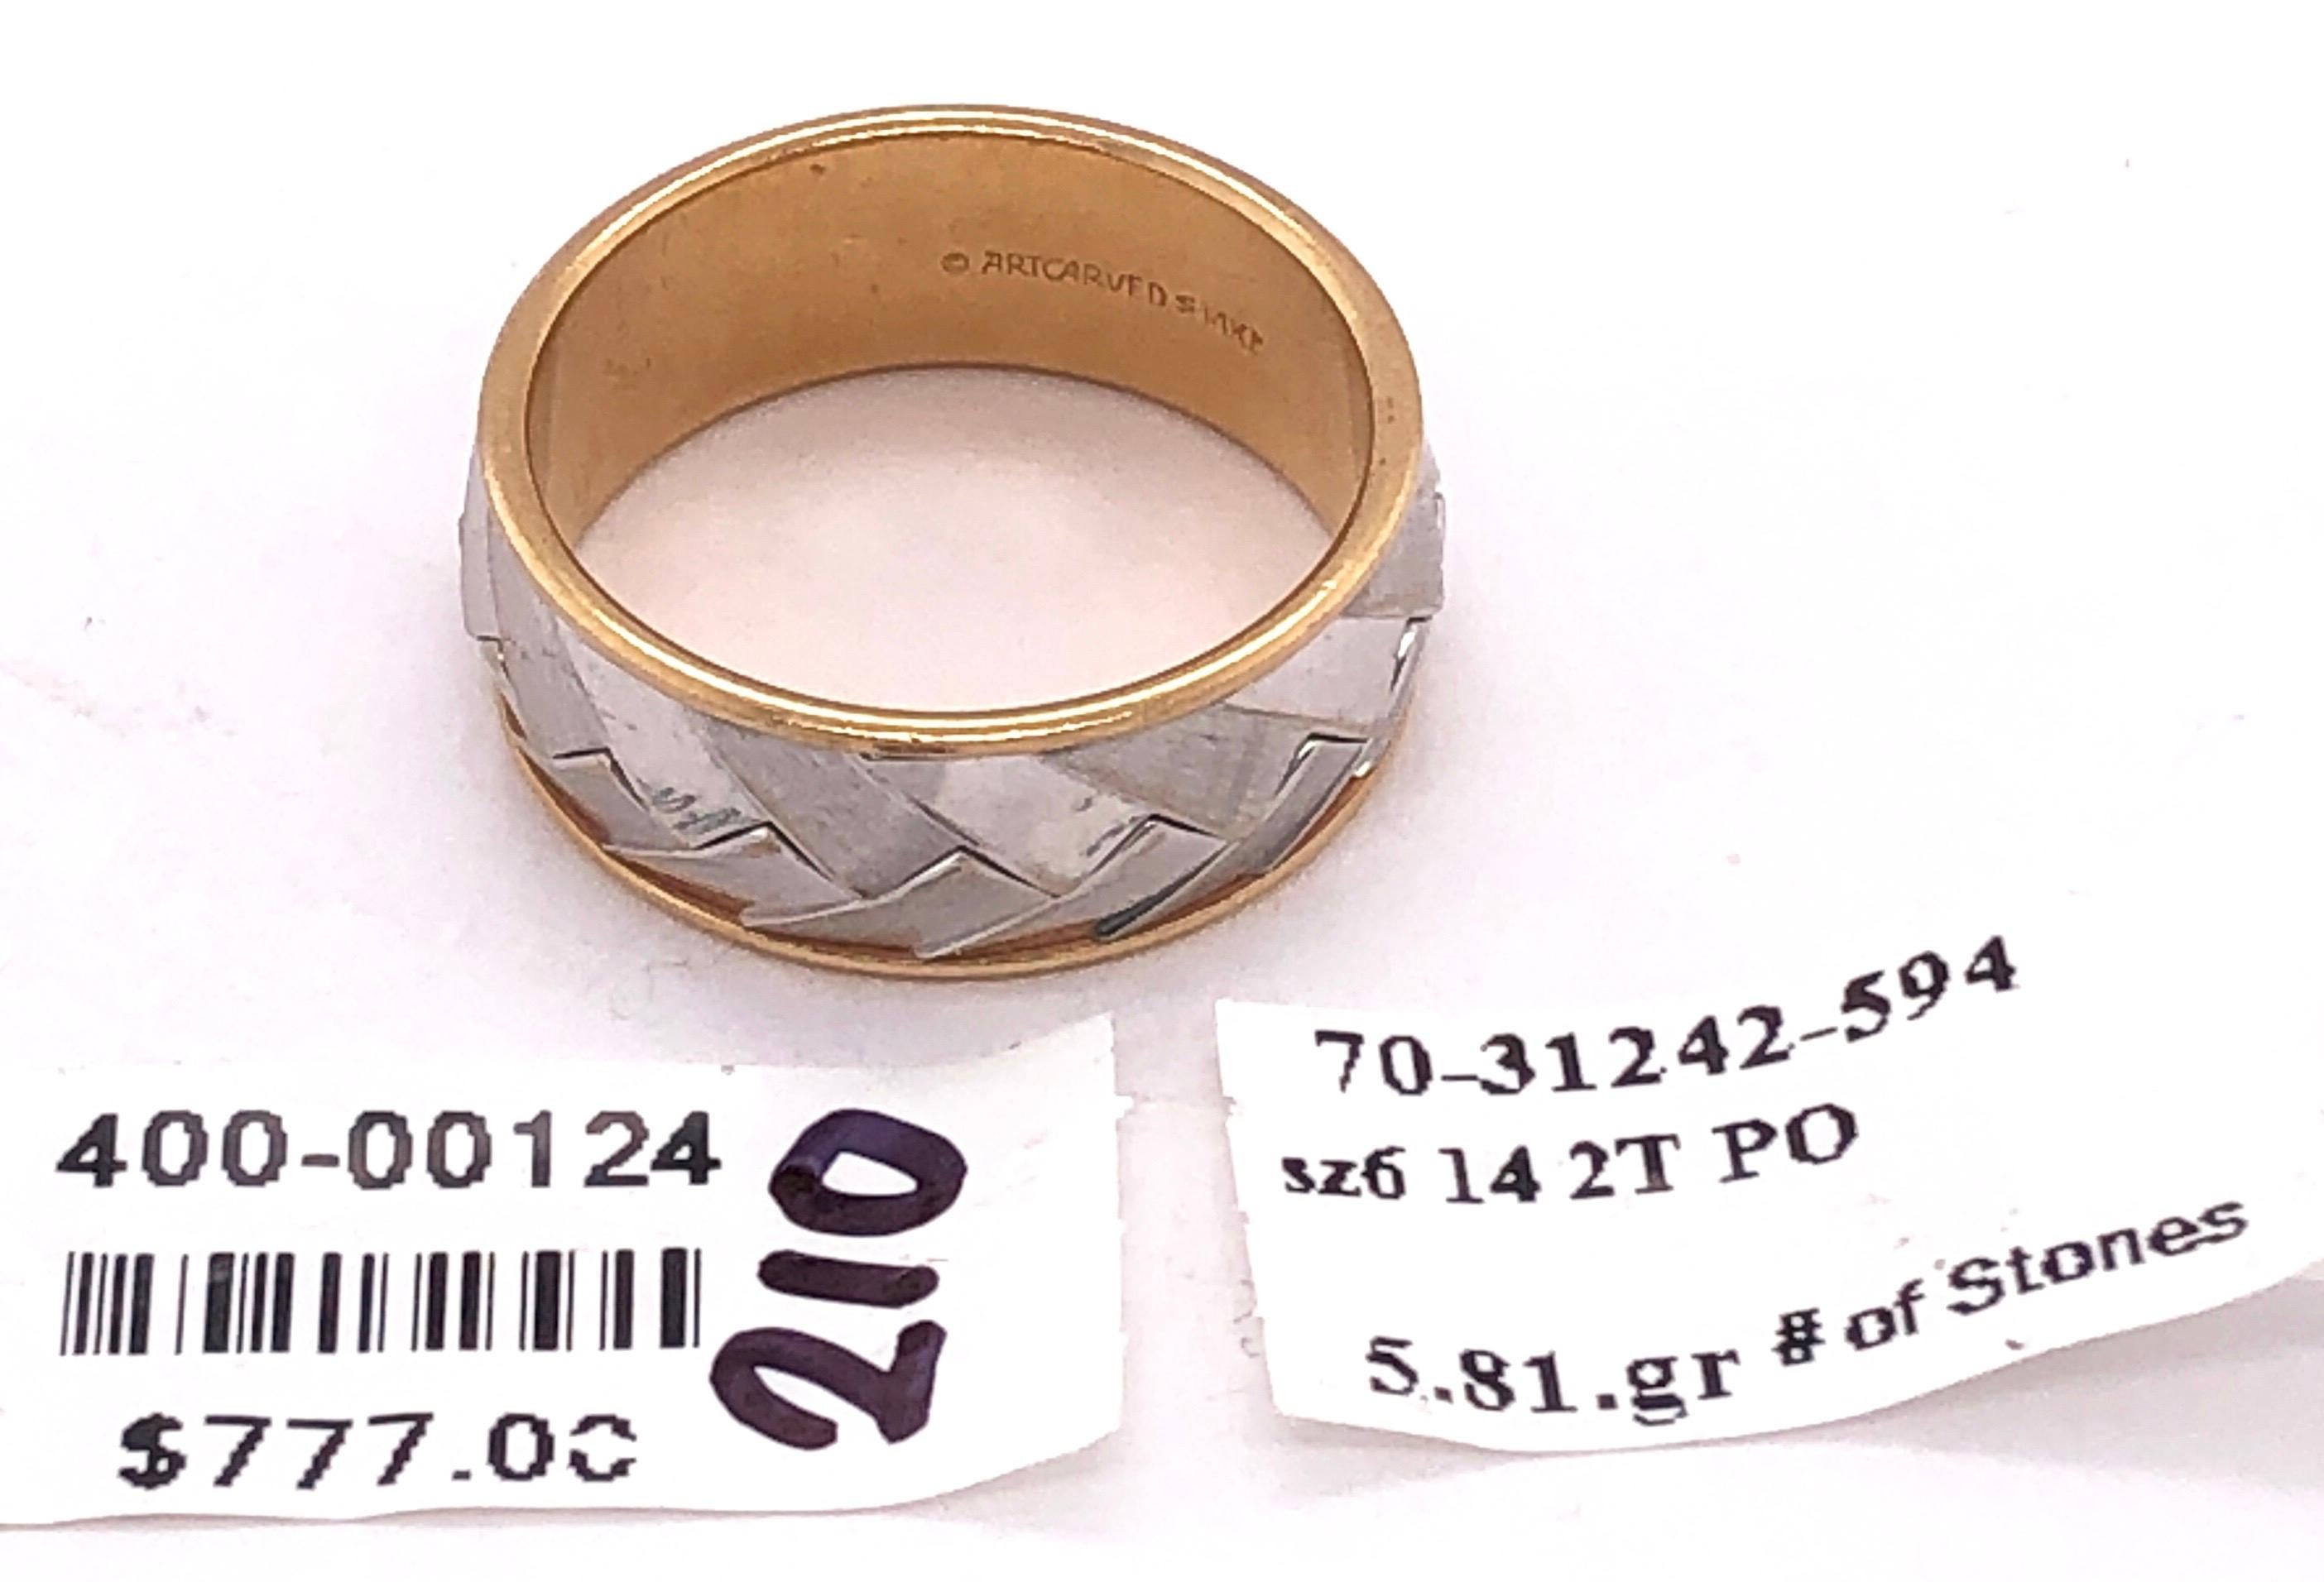 14 Karat Two-Tone White and Yellow Gold Weave Band or Wedding Ring For Sale 1